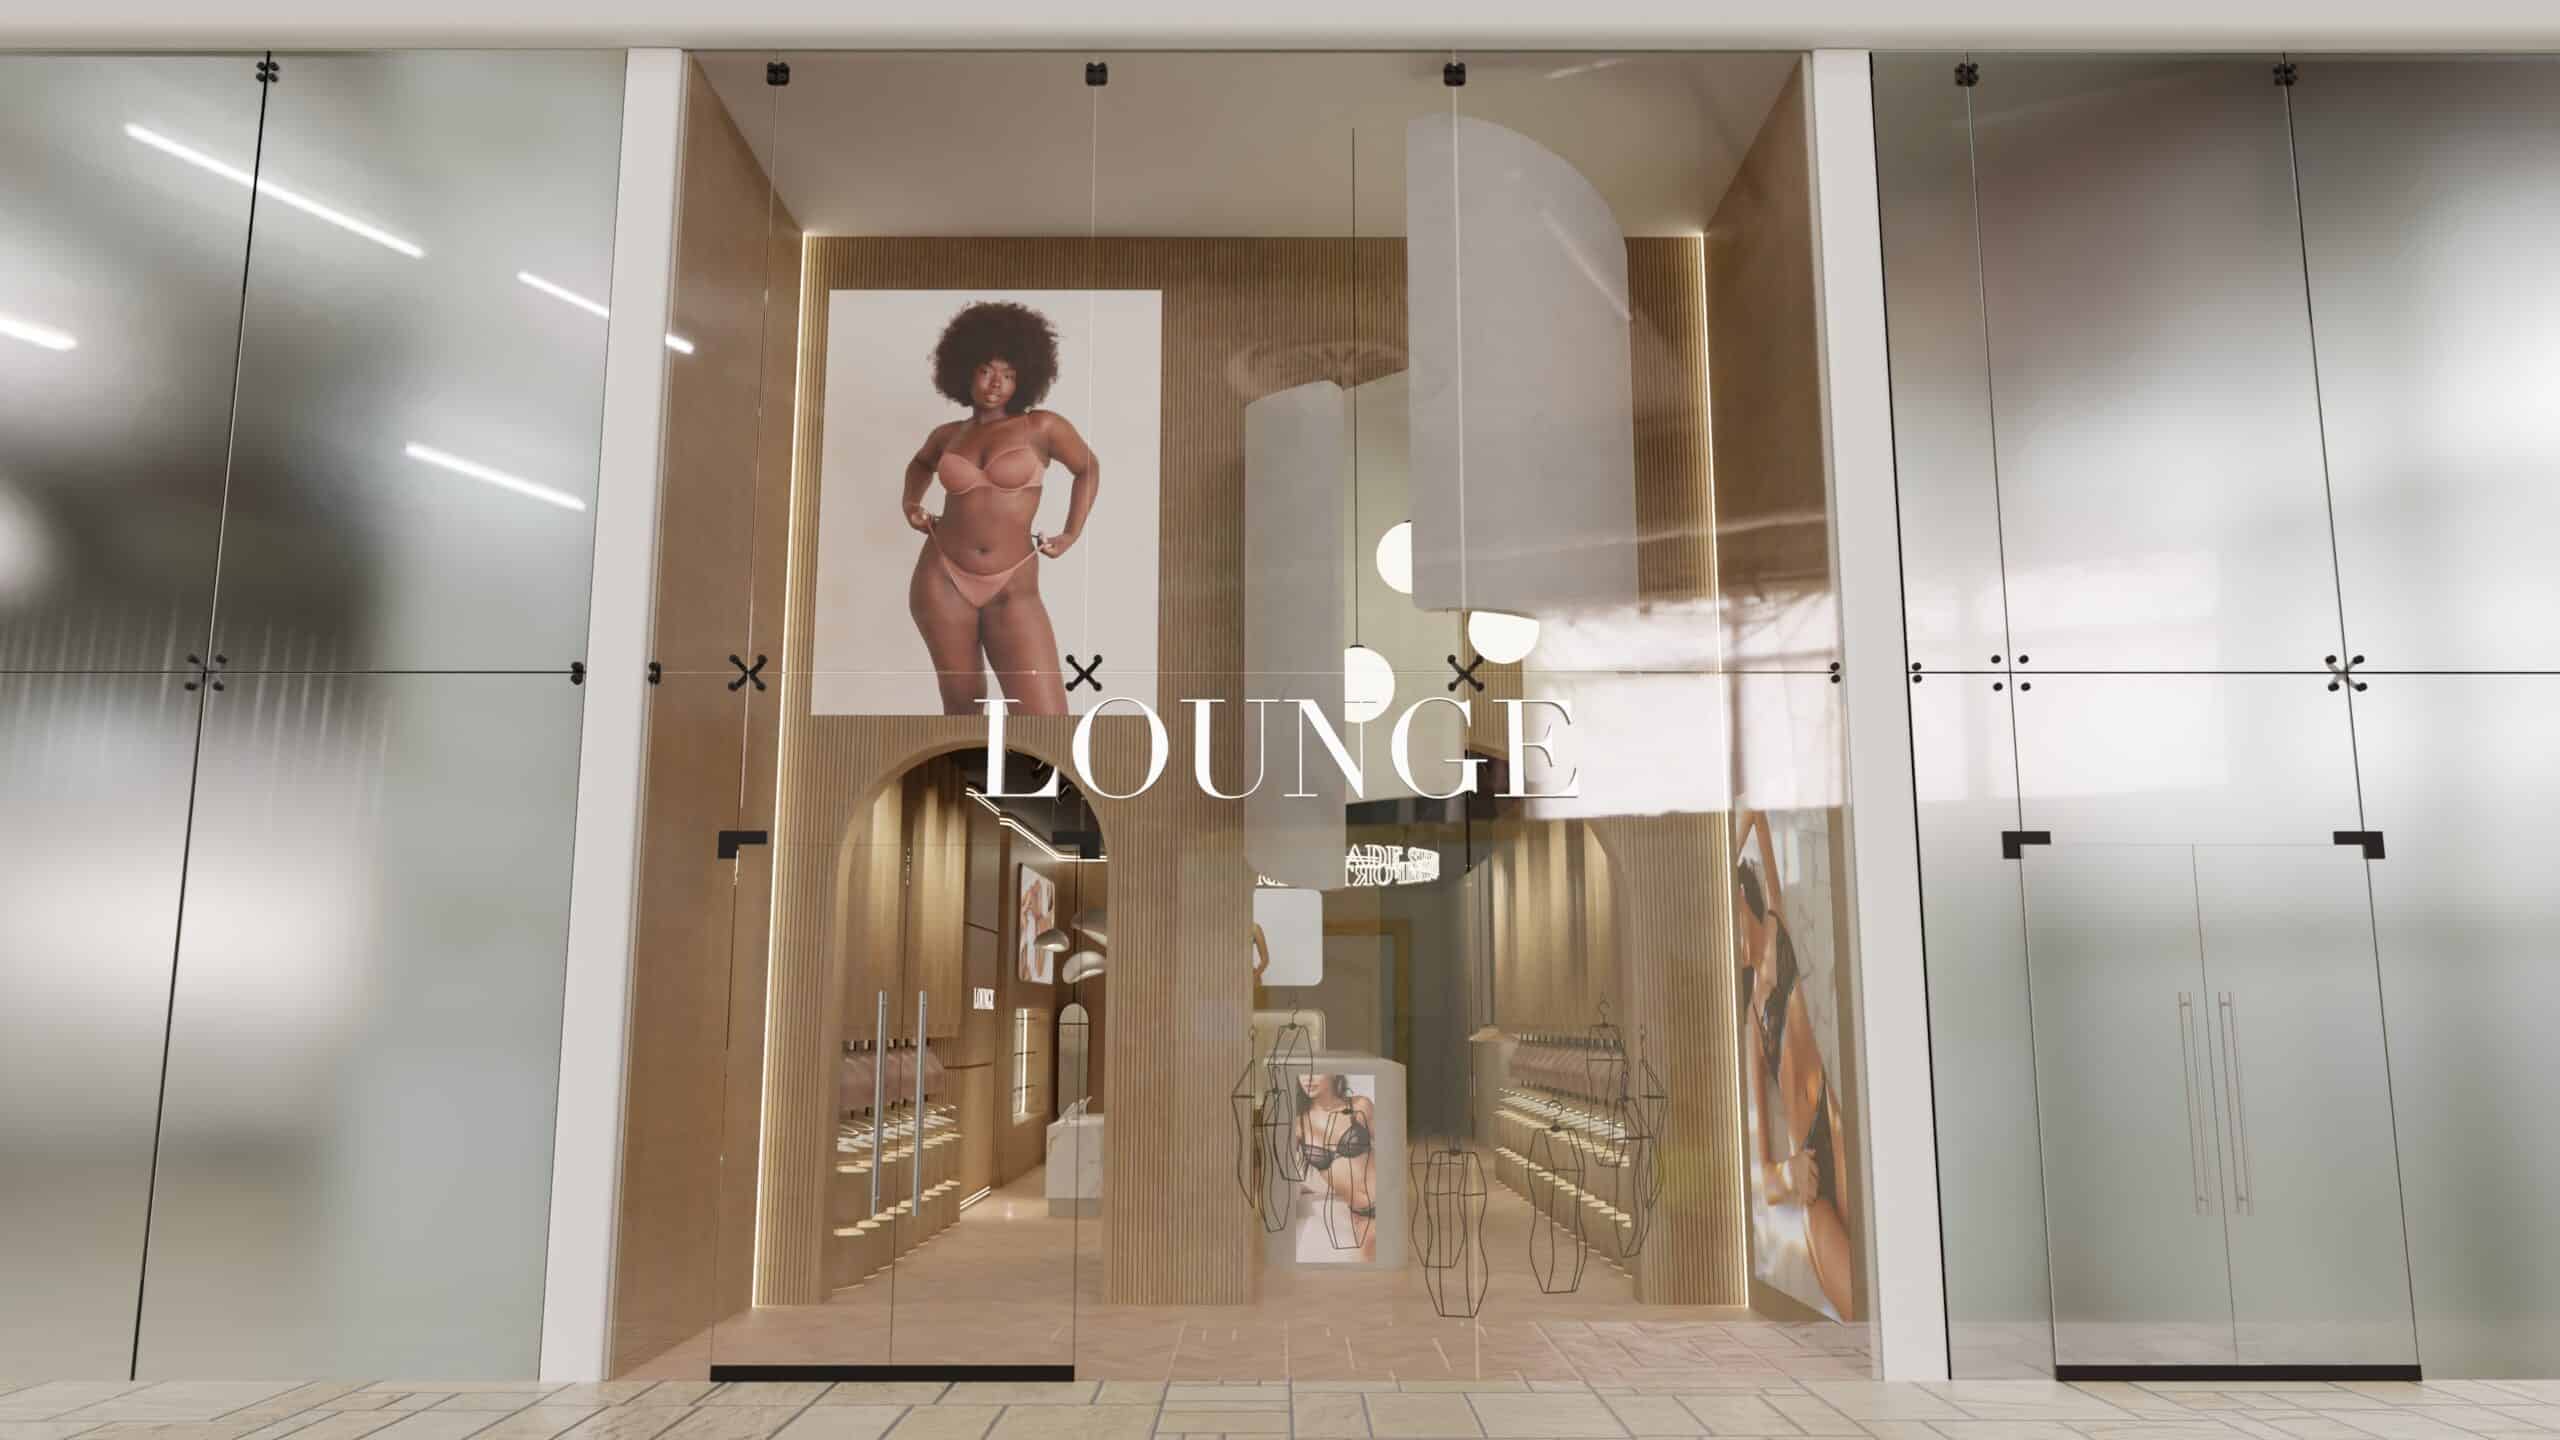 Lounge Underwear to launch first permanent physical store after